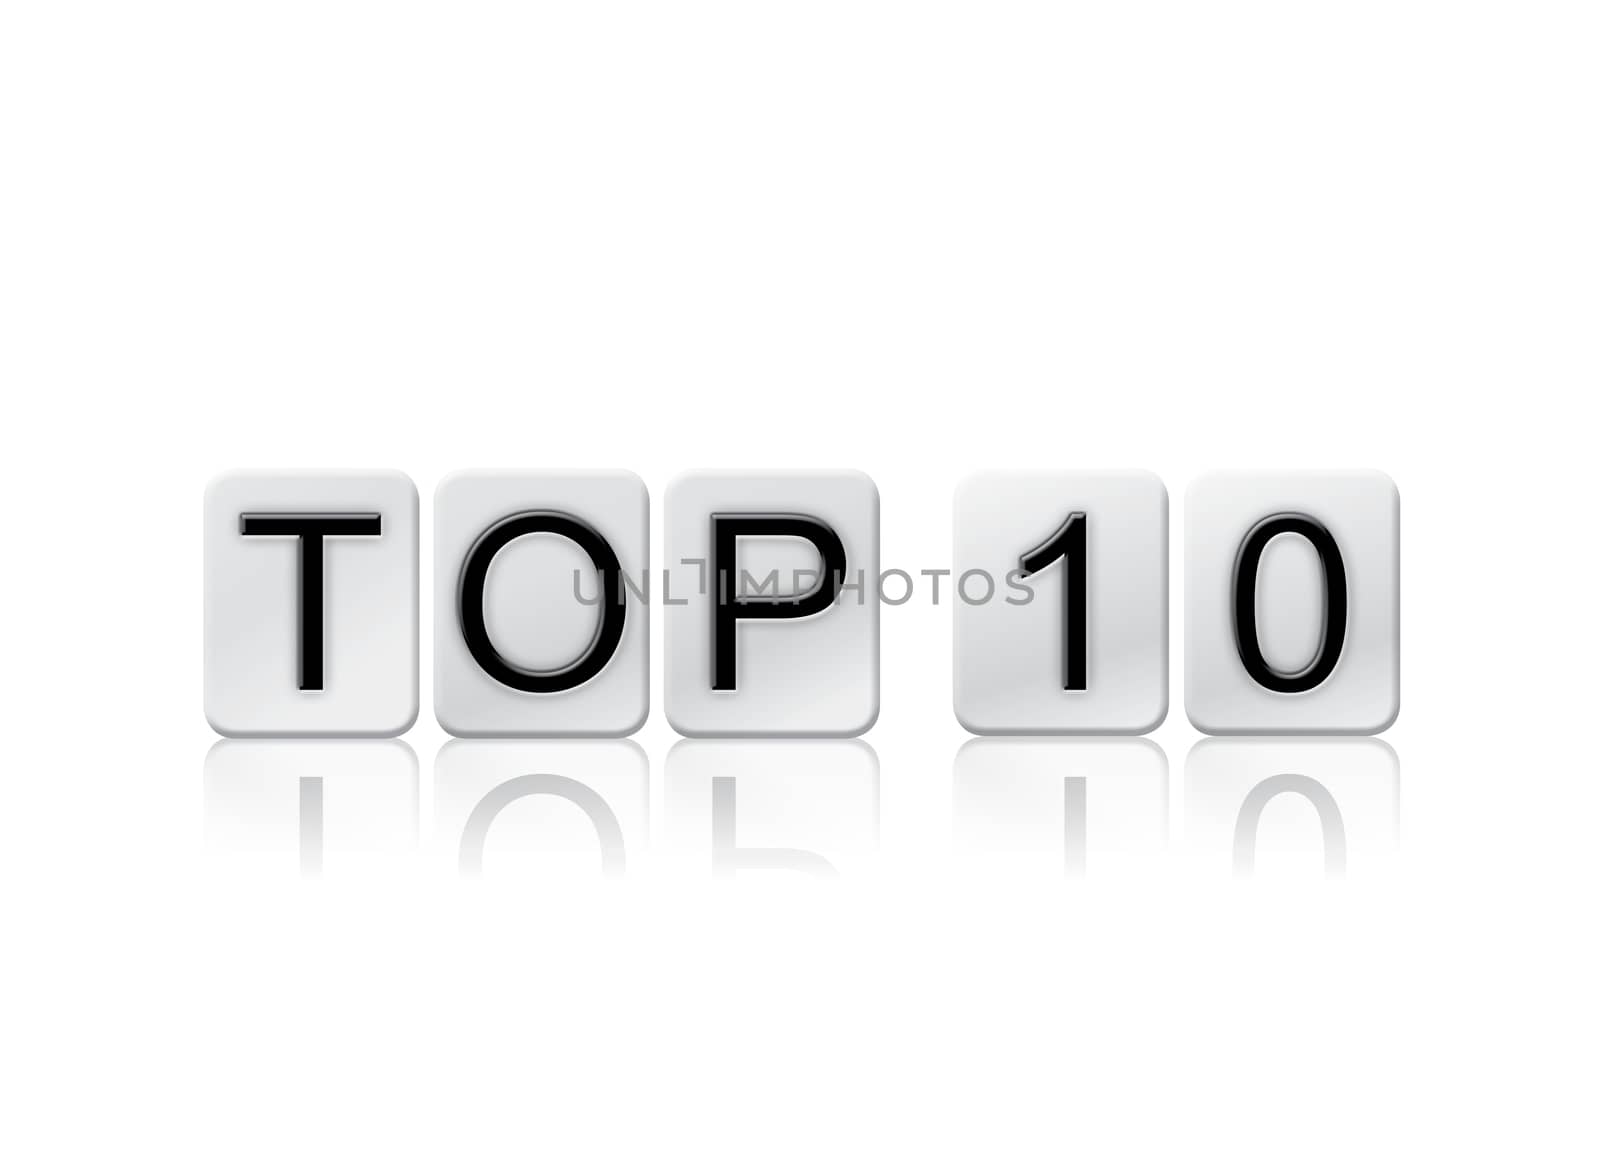 Top 10 Isolated Tiled Letters Concept and Theme by enterlinedesign